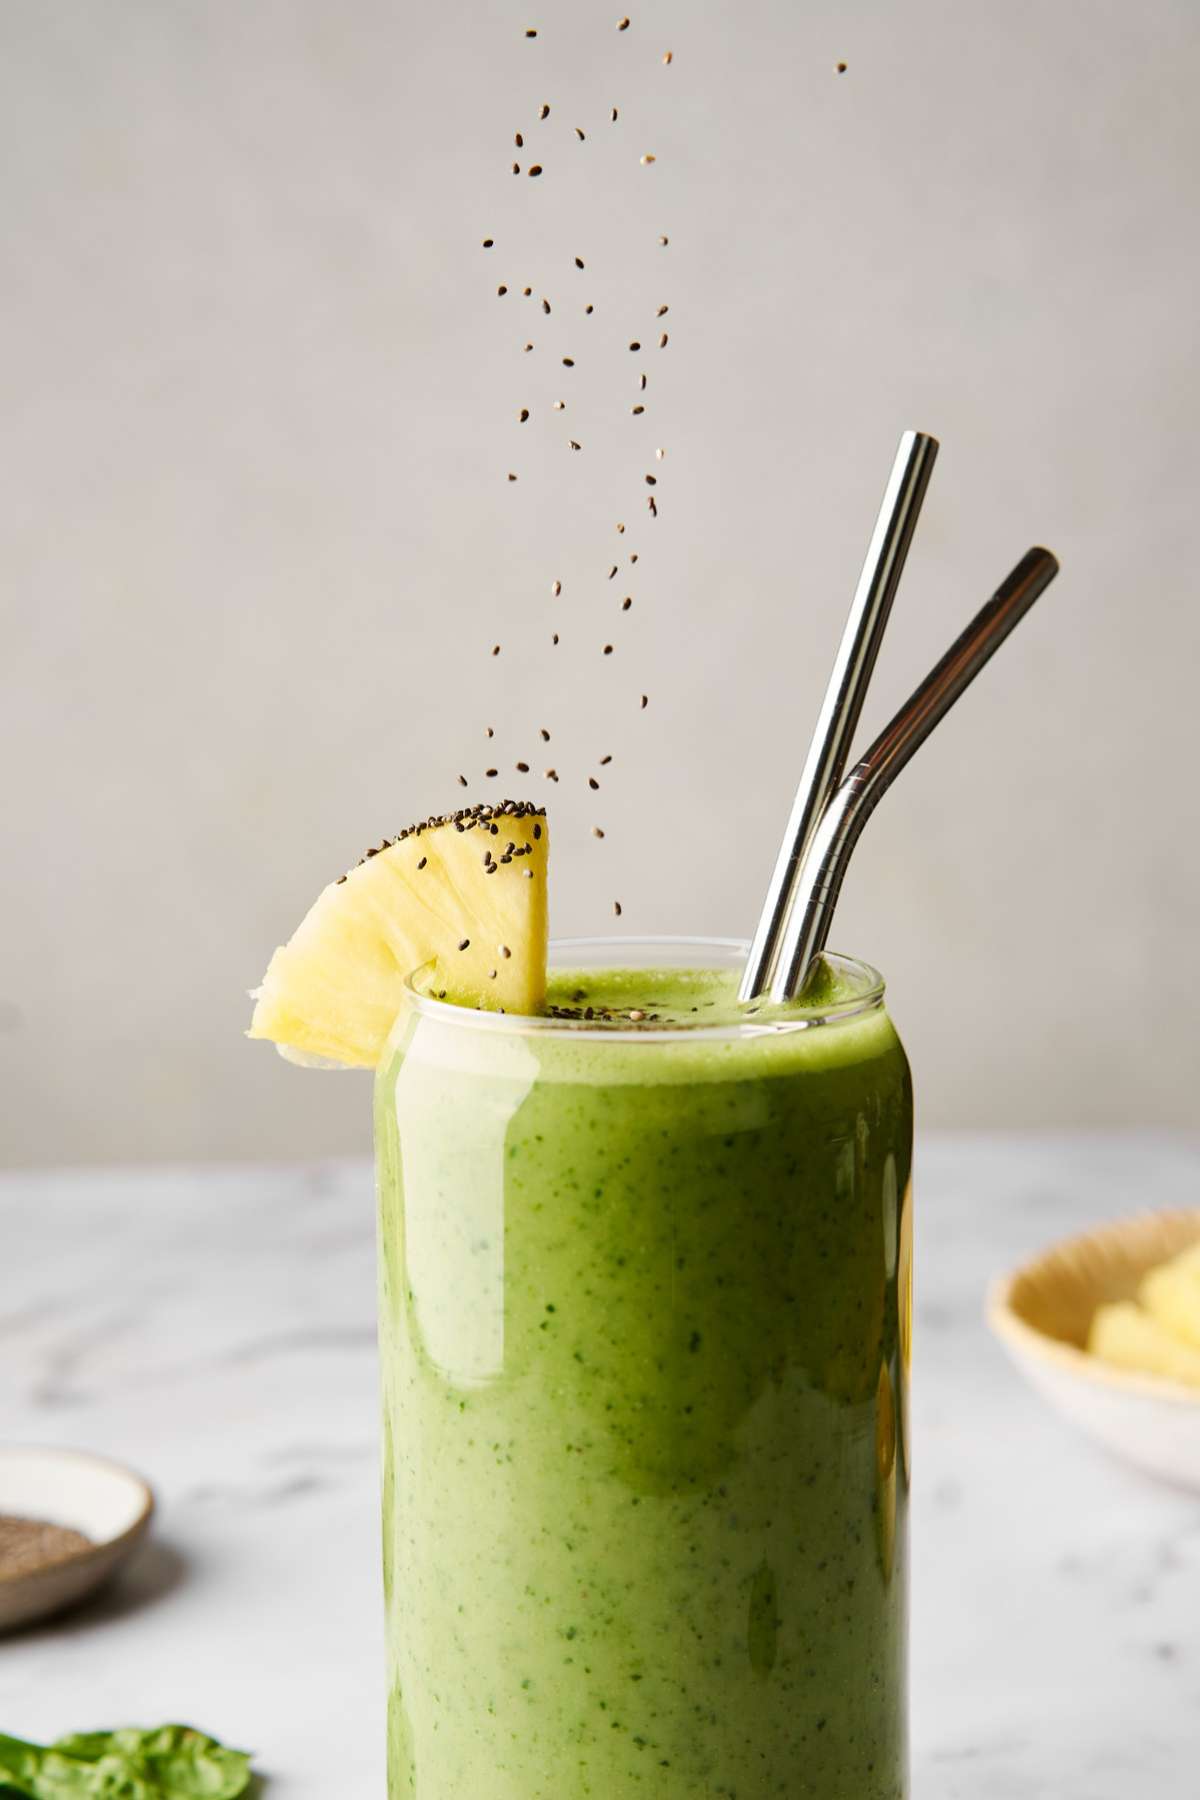 Sprinkling chia seeds over a green smoothie with two metal straws.